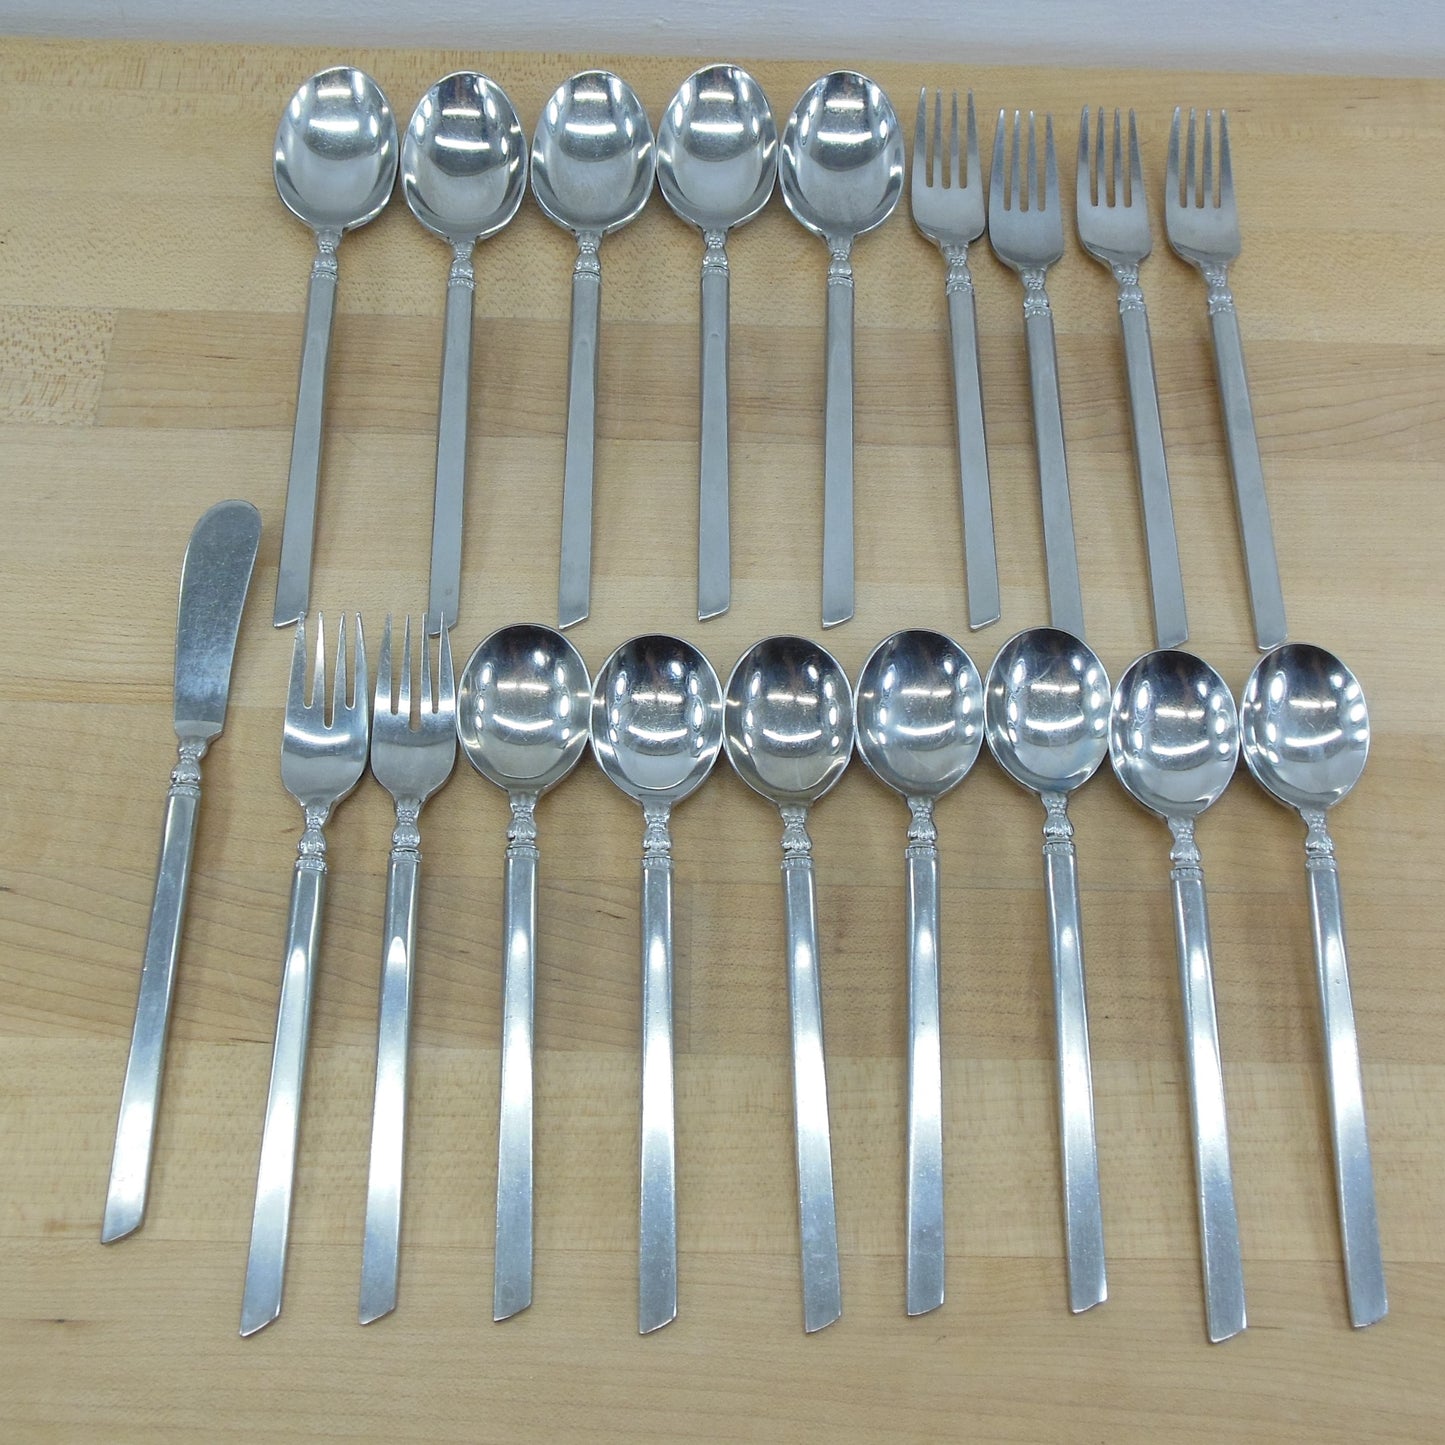 Everbright Premier Japan Stainless Perfection Flatware 19 Piece Lot